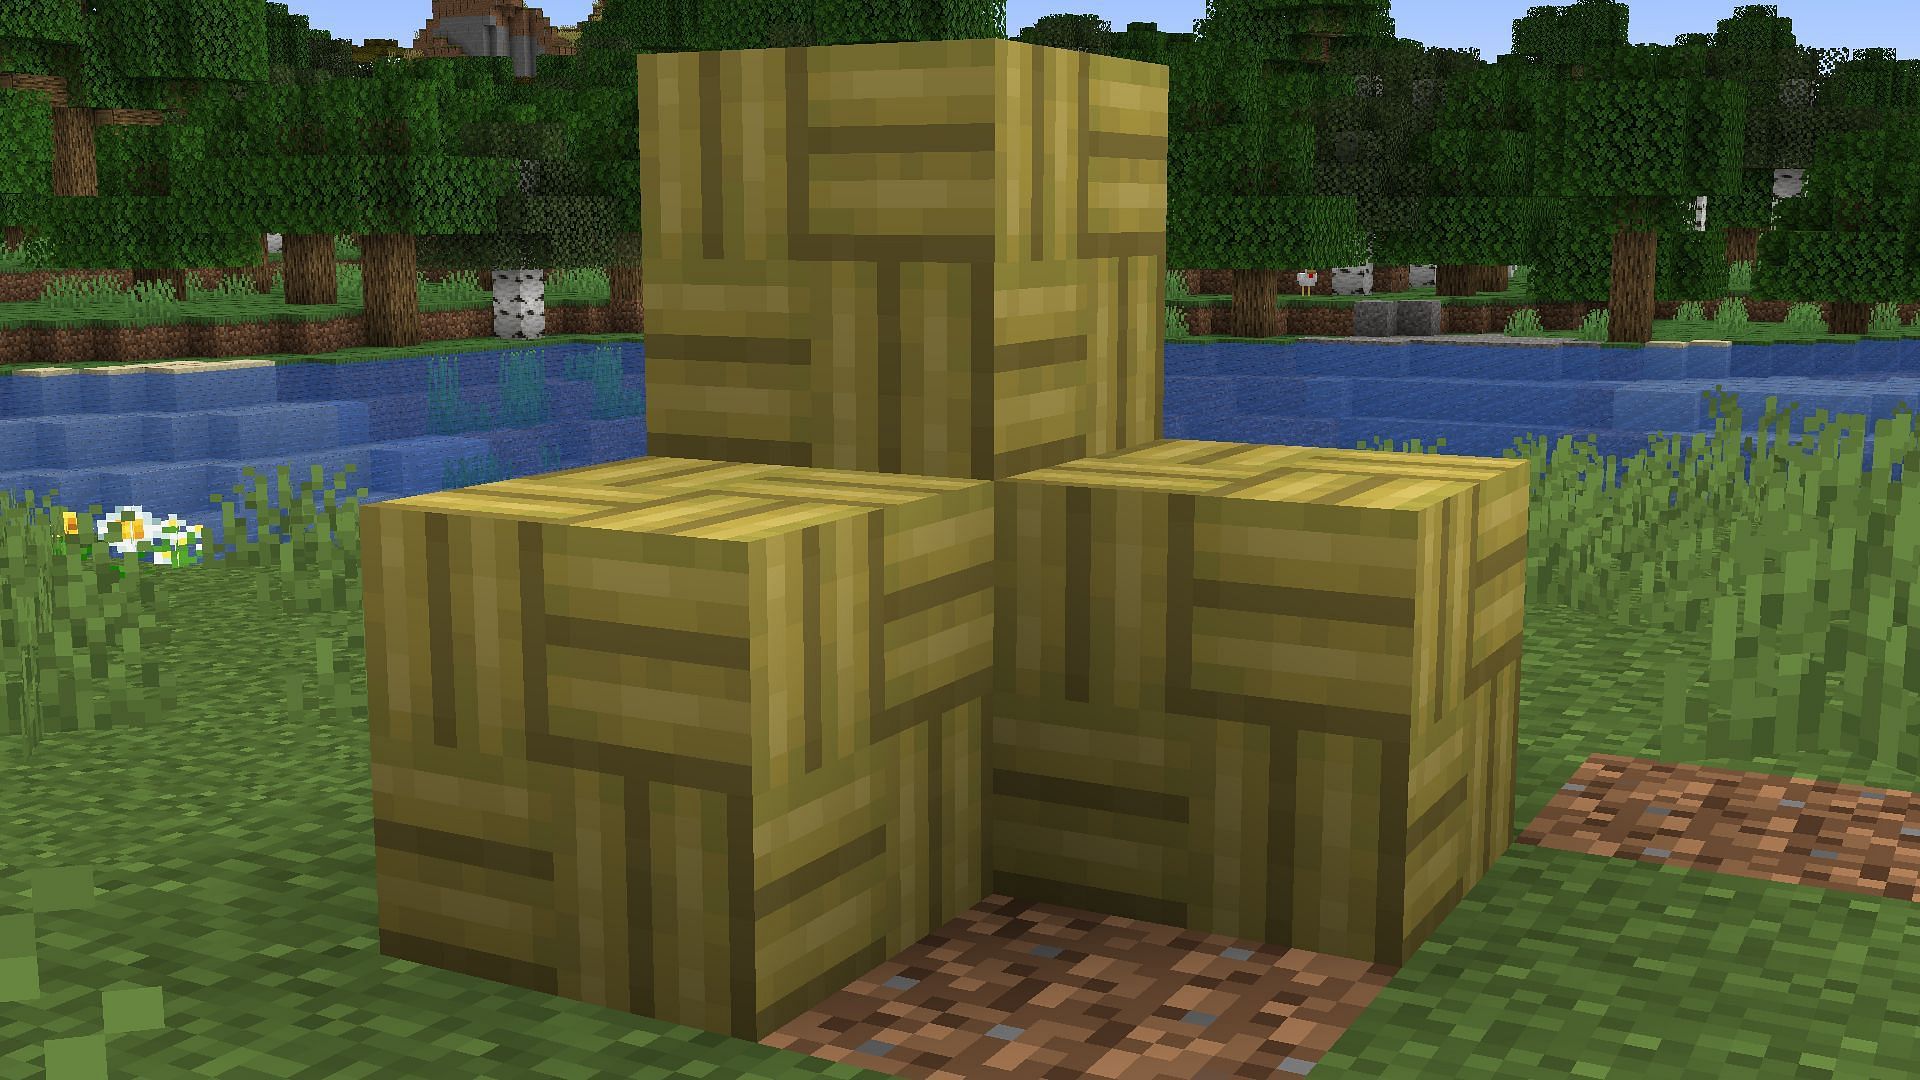 All kinds of bamboo blocks can be crafted using the farm in Minecraft (Image via Mojang)